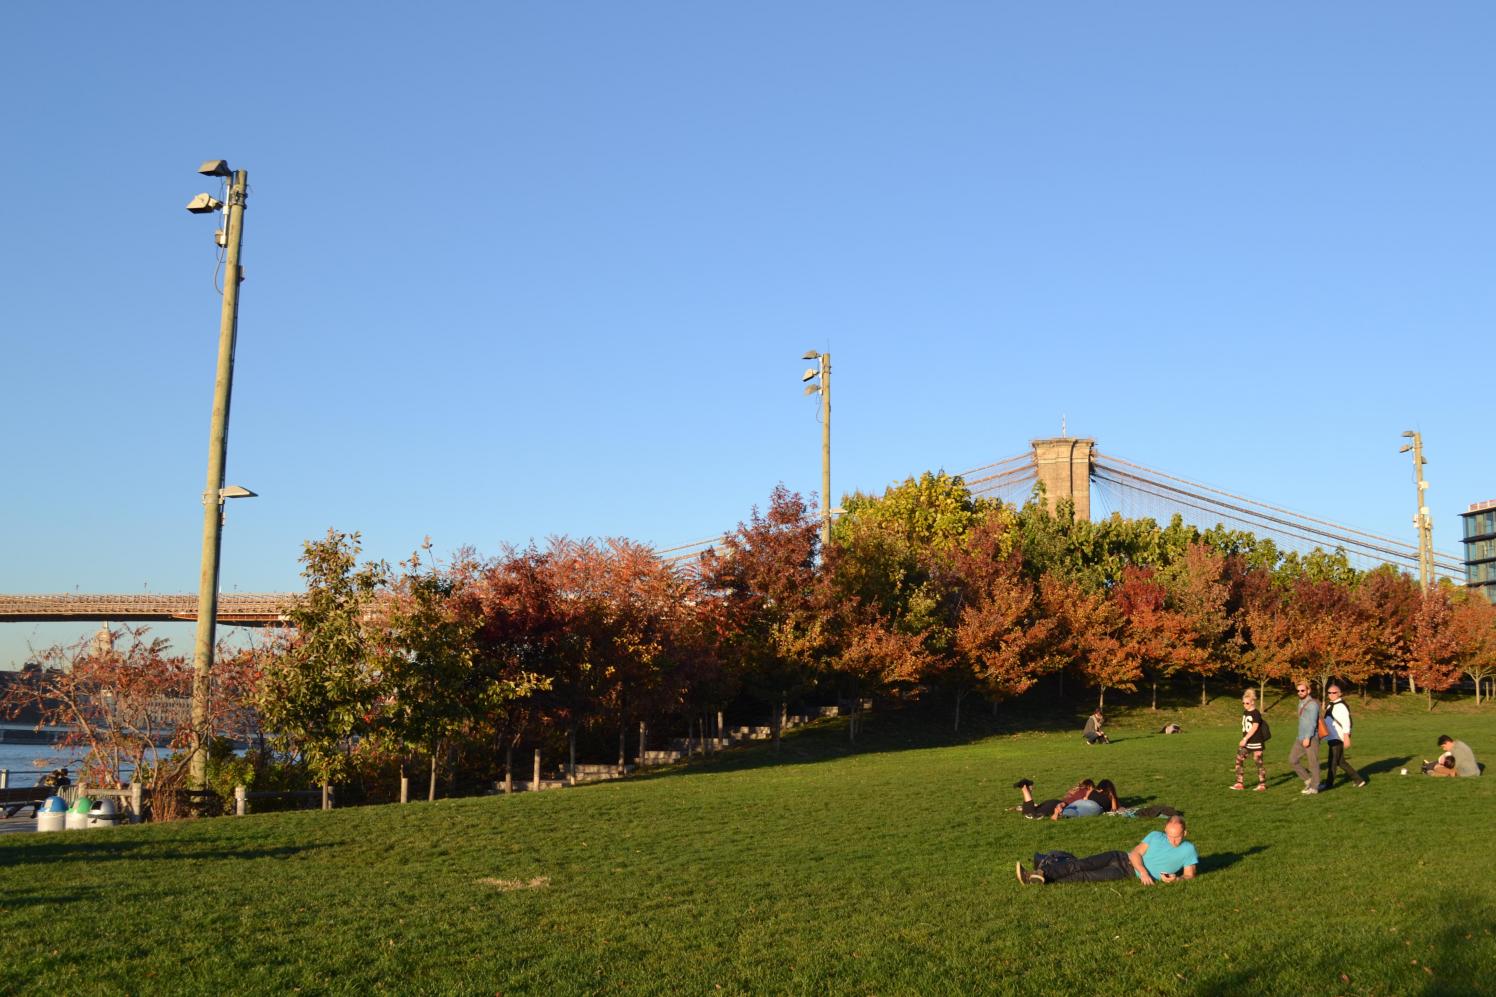 People lying on a lawn with autumn trees in the background on a sunny day.